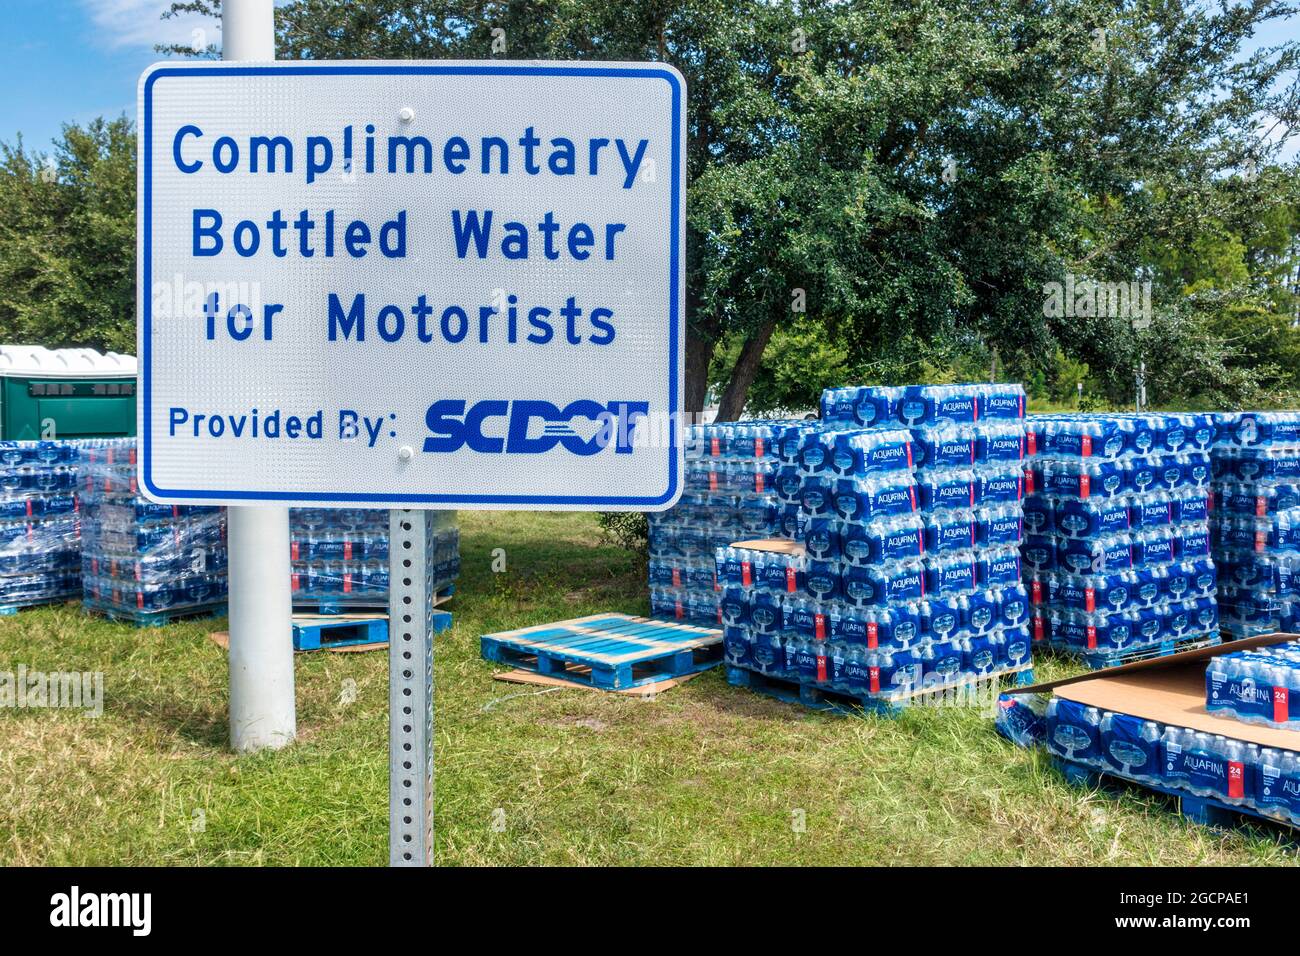 Complimentary cases of water for people evacuating from Florida during a Category 5 Hurricane warning at a rest stop on I-95 in South Carolina. Stock Photo